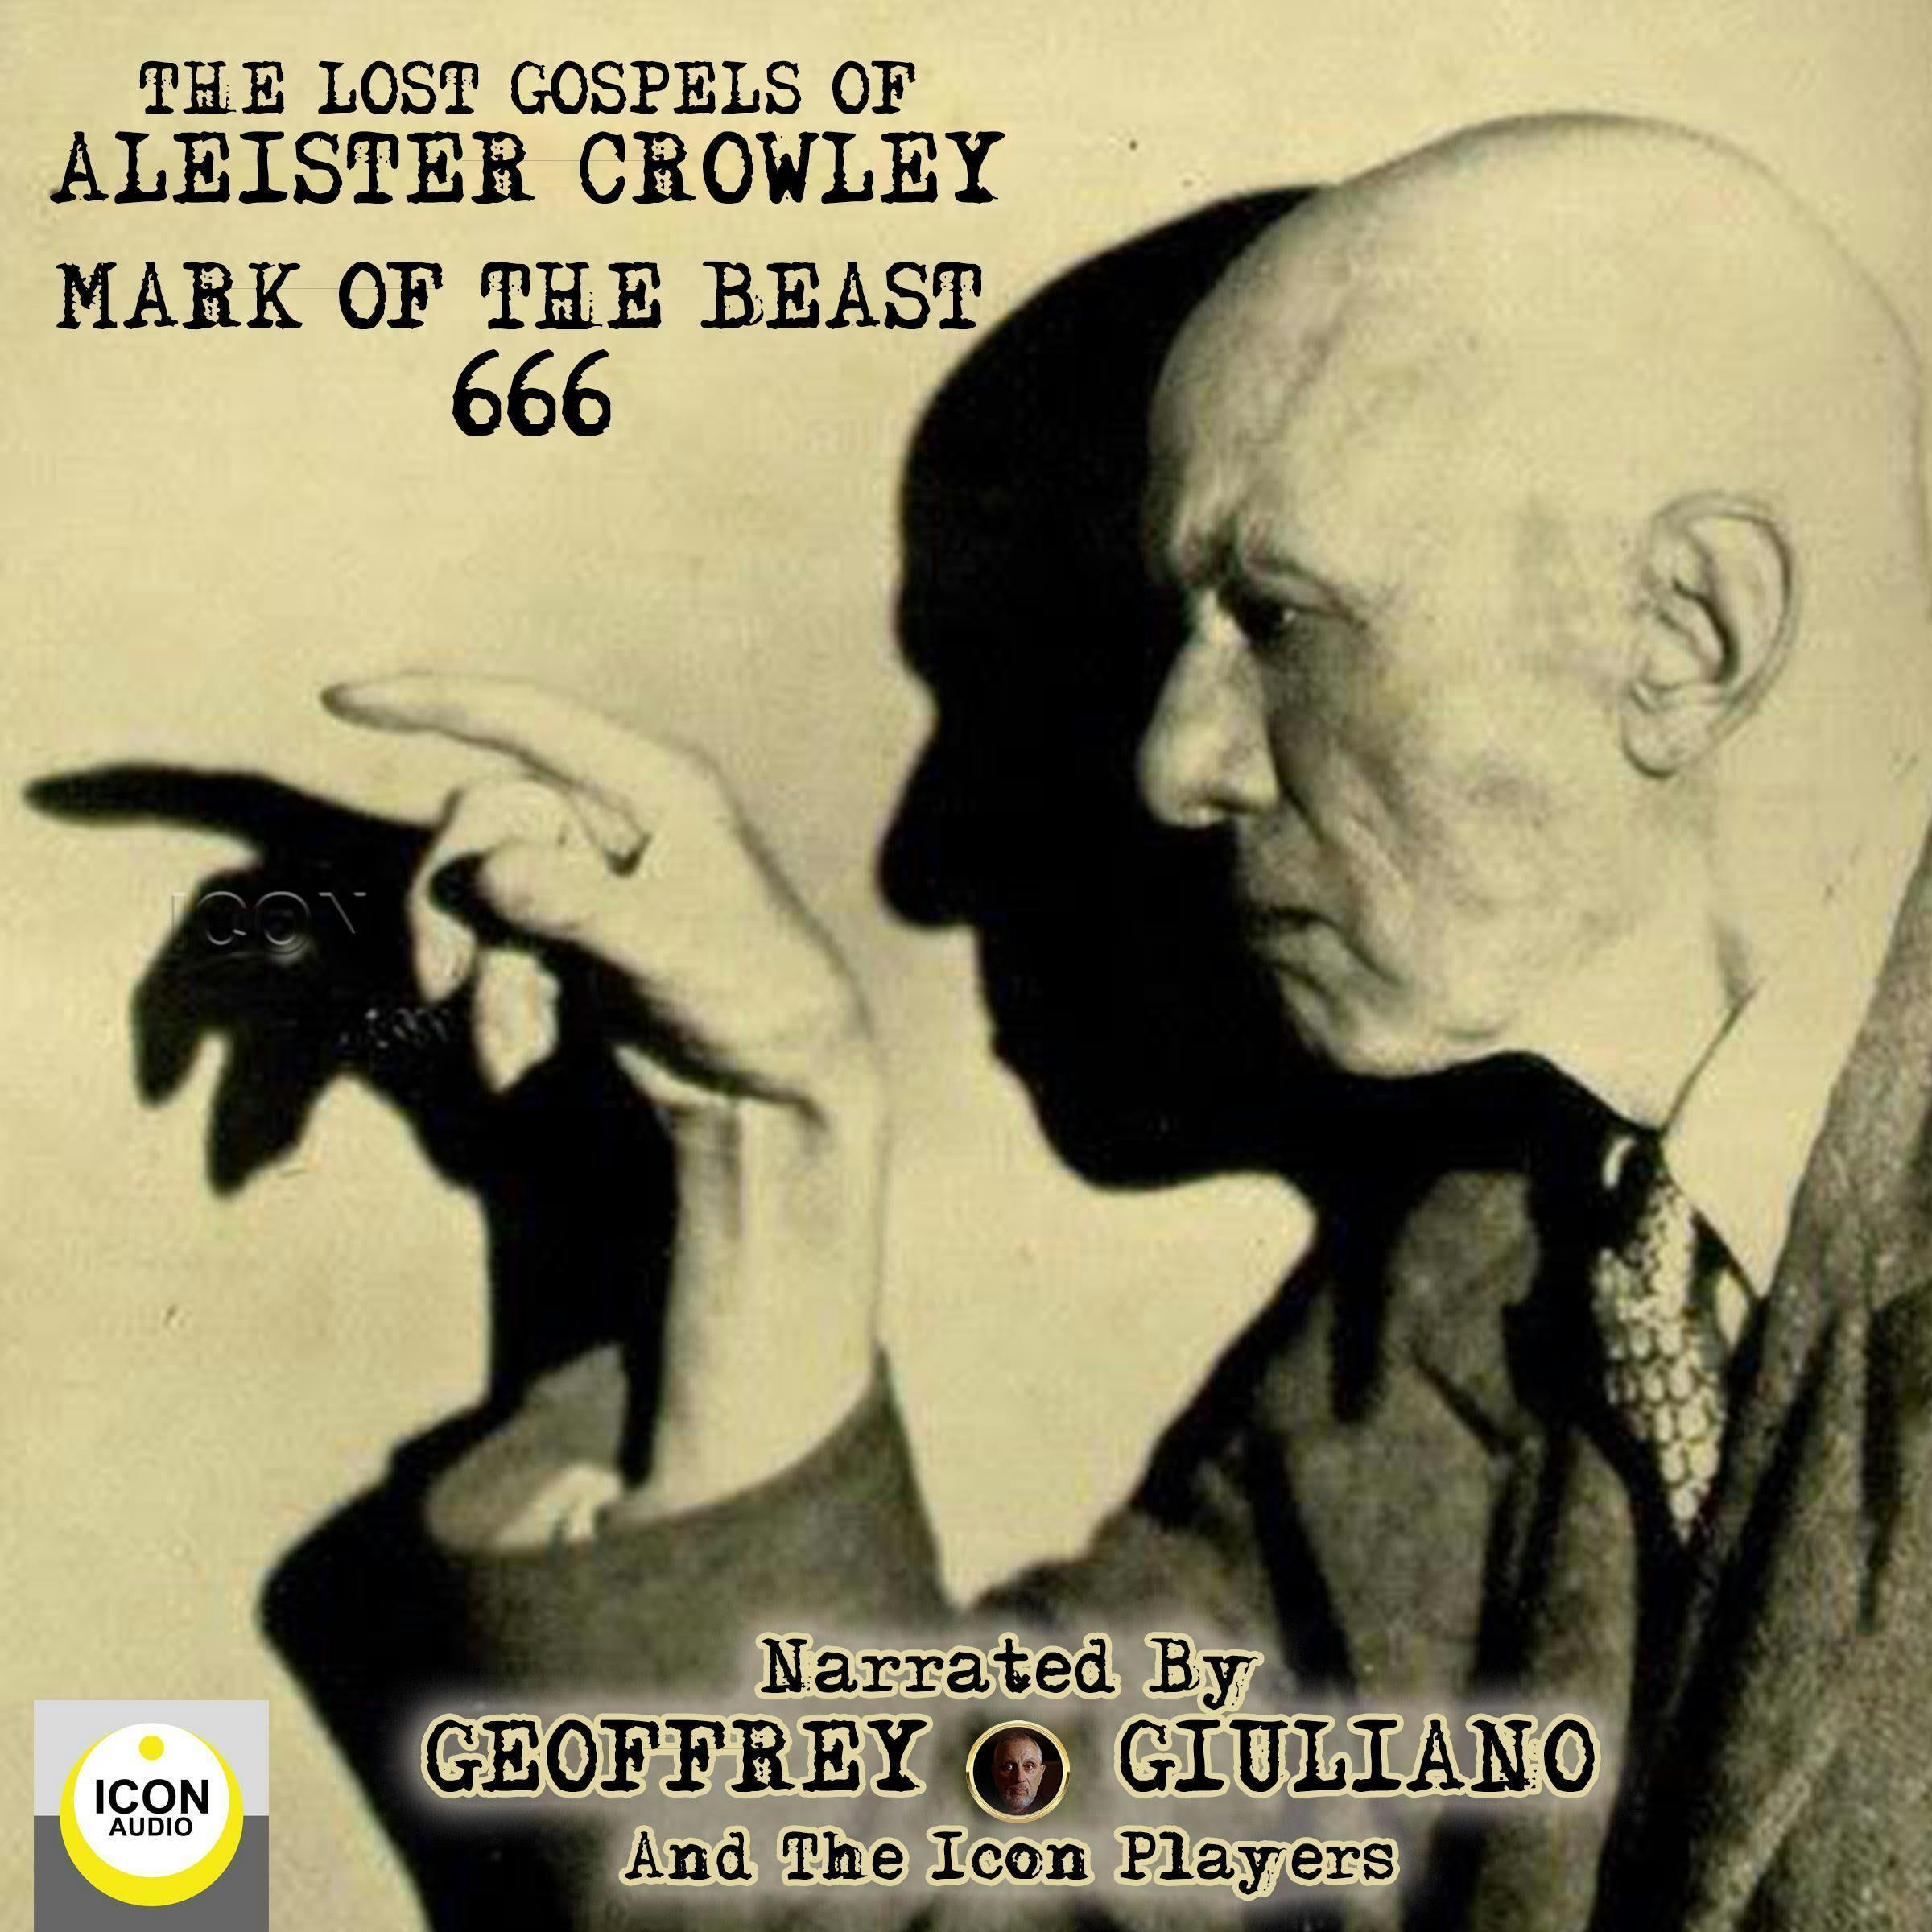 The Lost Gospels of Aleister Crowley: Mark of the Beast 666 - Aleister Crowley